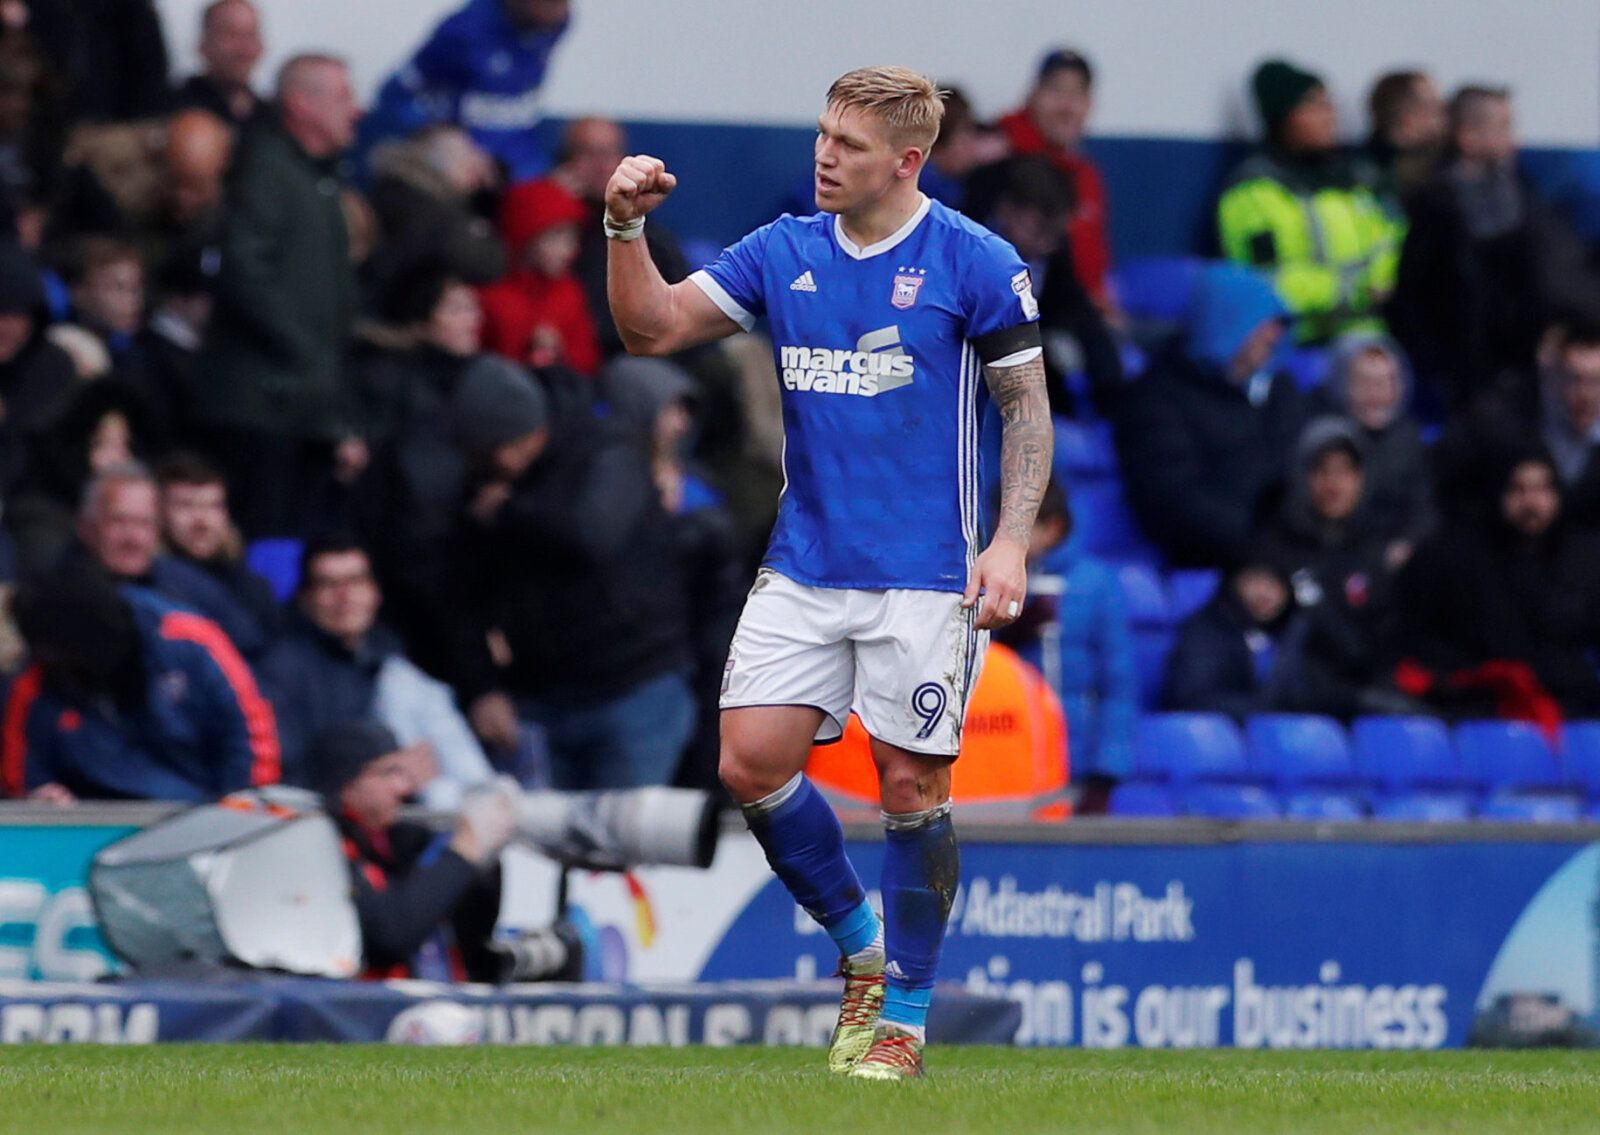 Soccer Football - Championship - Ipswich Town vs Millwall - Portman Road, Ipswich, Britain - April 2, 2018   Ipswich Town's Martyn Waghorn celebrates scoring their second goal   Action Images/Andrew Couldridge    EDITORIAL USE ONLY. No use with unauthorized audio, video, data, fixture lists, club/league logos or 